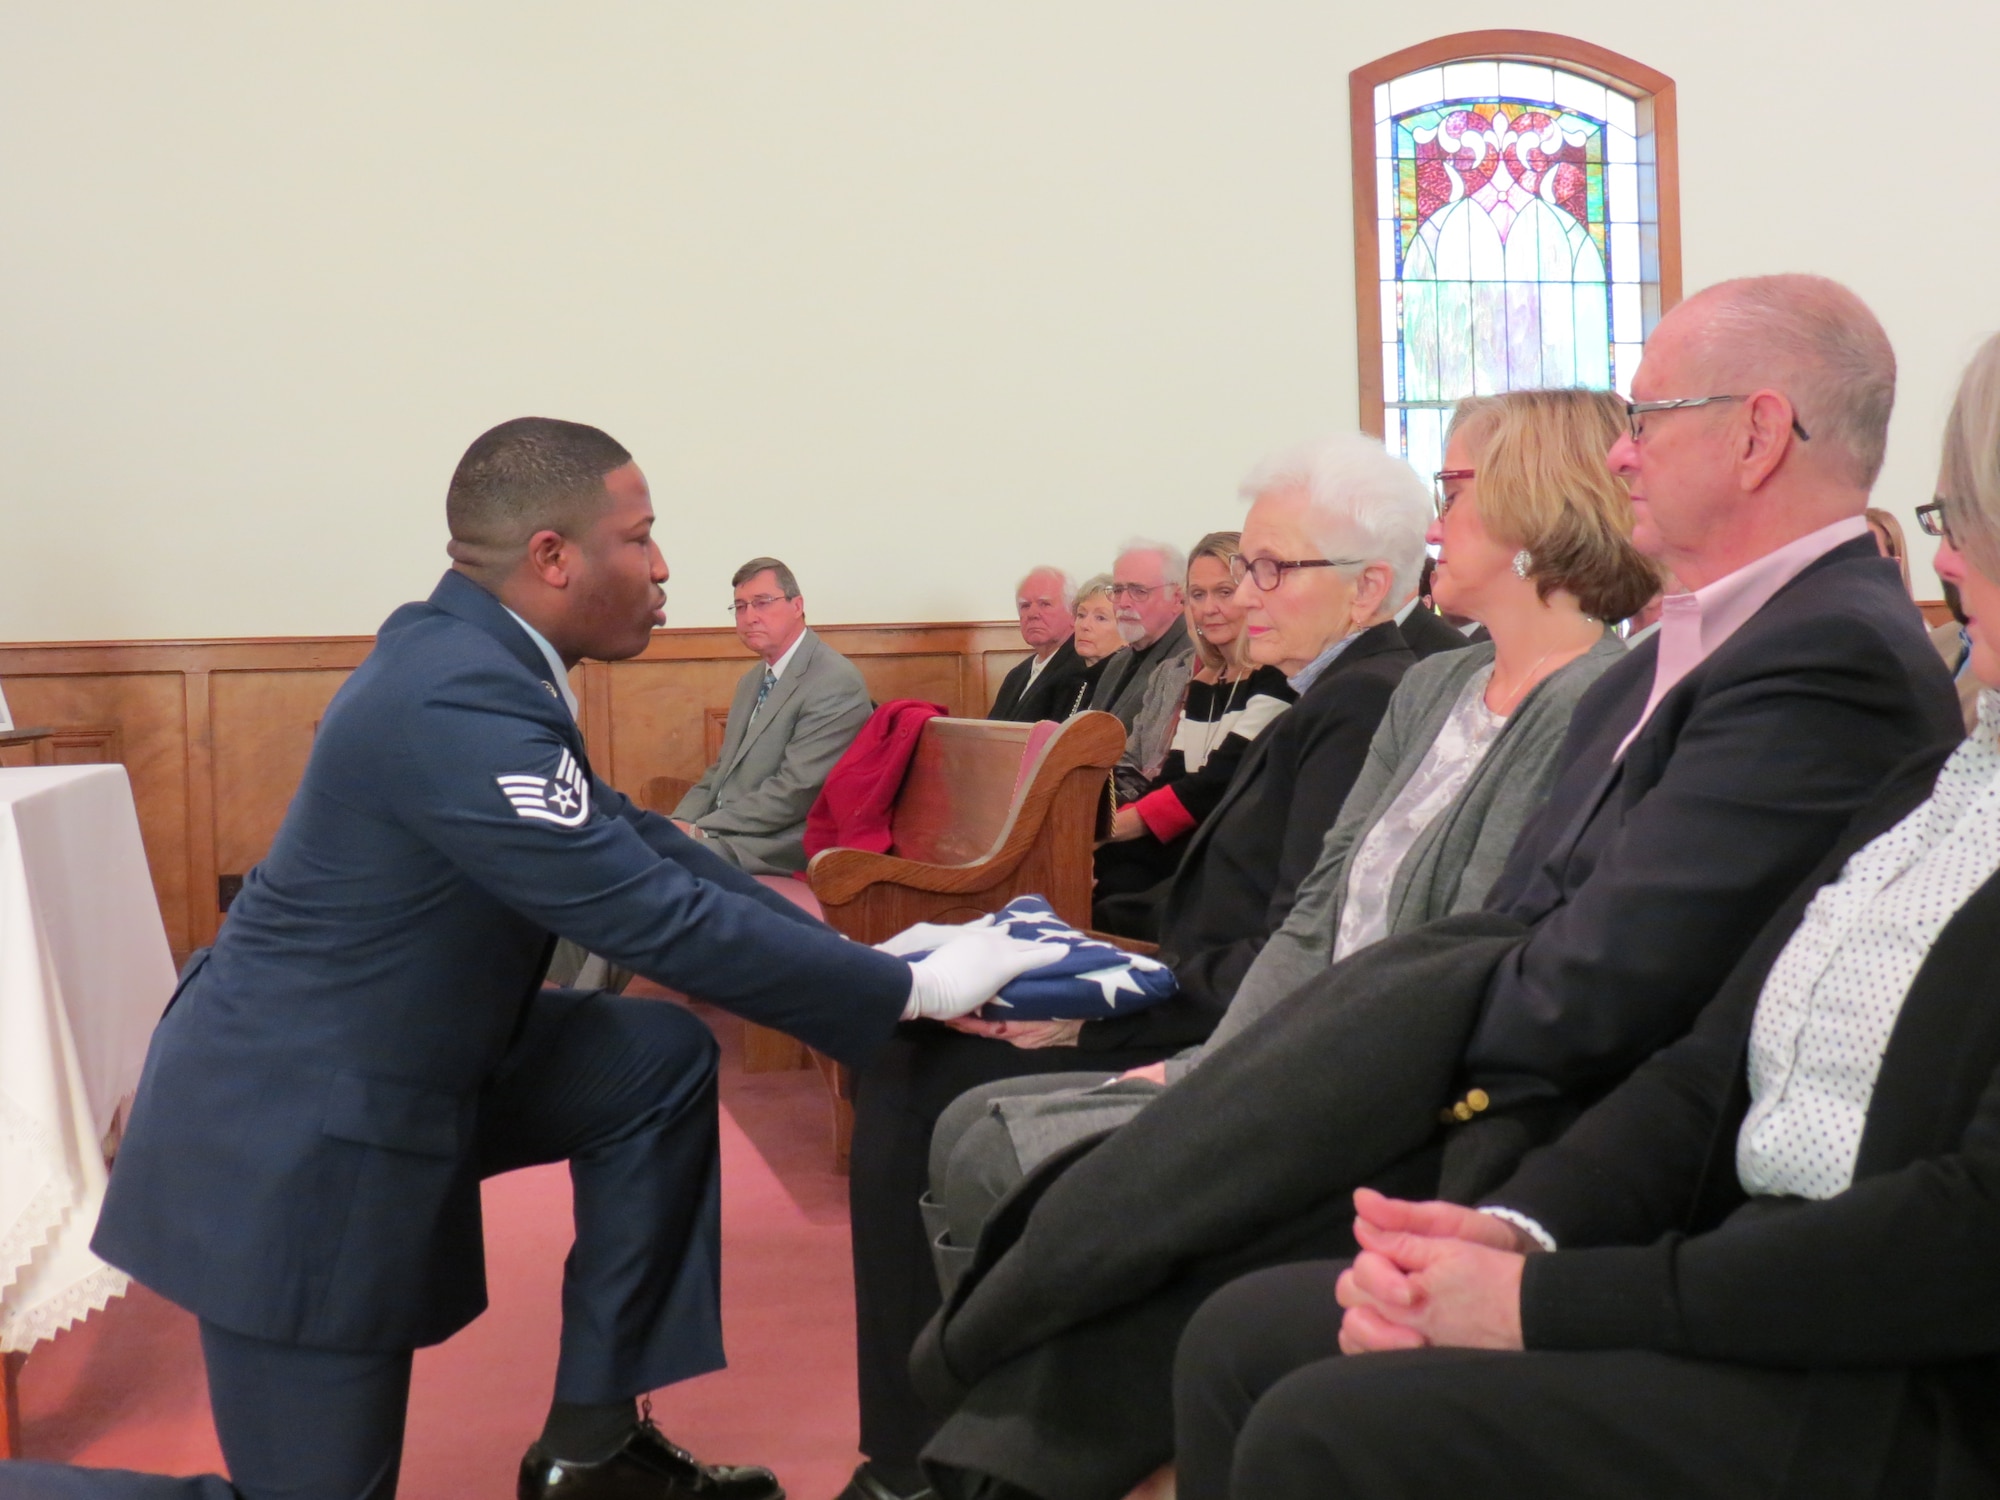 Staff Sgt. Mitchell Wright, 42nd Security Forces Squadron, presents the U.S. flag to Christine Weathington, widow of retired Chief Master Sgt. Billy Weathington, at the chief master sergeant’s memorial service in Newville, Alabama, Jan. 13, 2018. Weathington, age 87 at his passing on Jan. 1, 2018, was the security forces career field’s third chief master sergeant, ending his 27-year active duty career in 1979 as the senior enlisted advisor to Air Force Security Forces. He continued to serve as the director of Plans and Security Acquisitions, U.S. Air Force, retiring in 1990. Joining Wright in the 42nd SFS flag detail at the memorial service were Airman 1st Class Olivia Landry, Senior Airman Timothy Bridges and Senior Master Sgt. Jeffrey Tobin. (Courtesy photo)